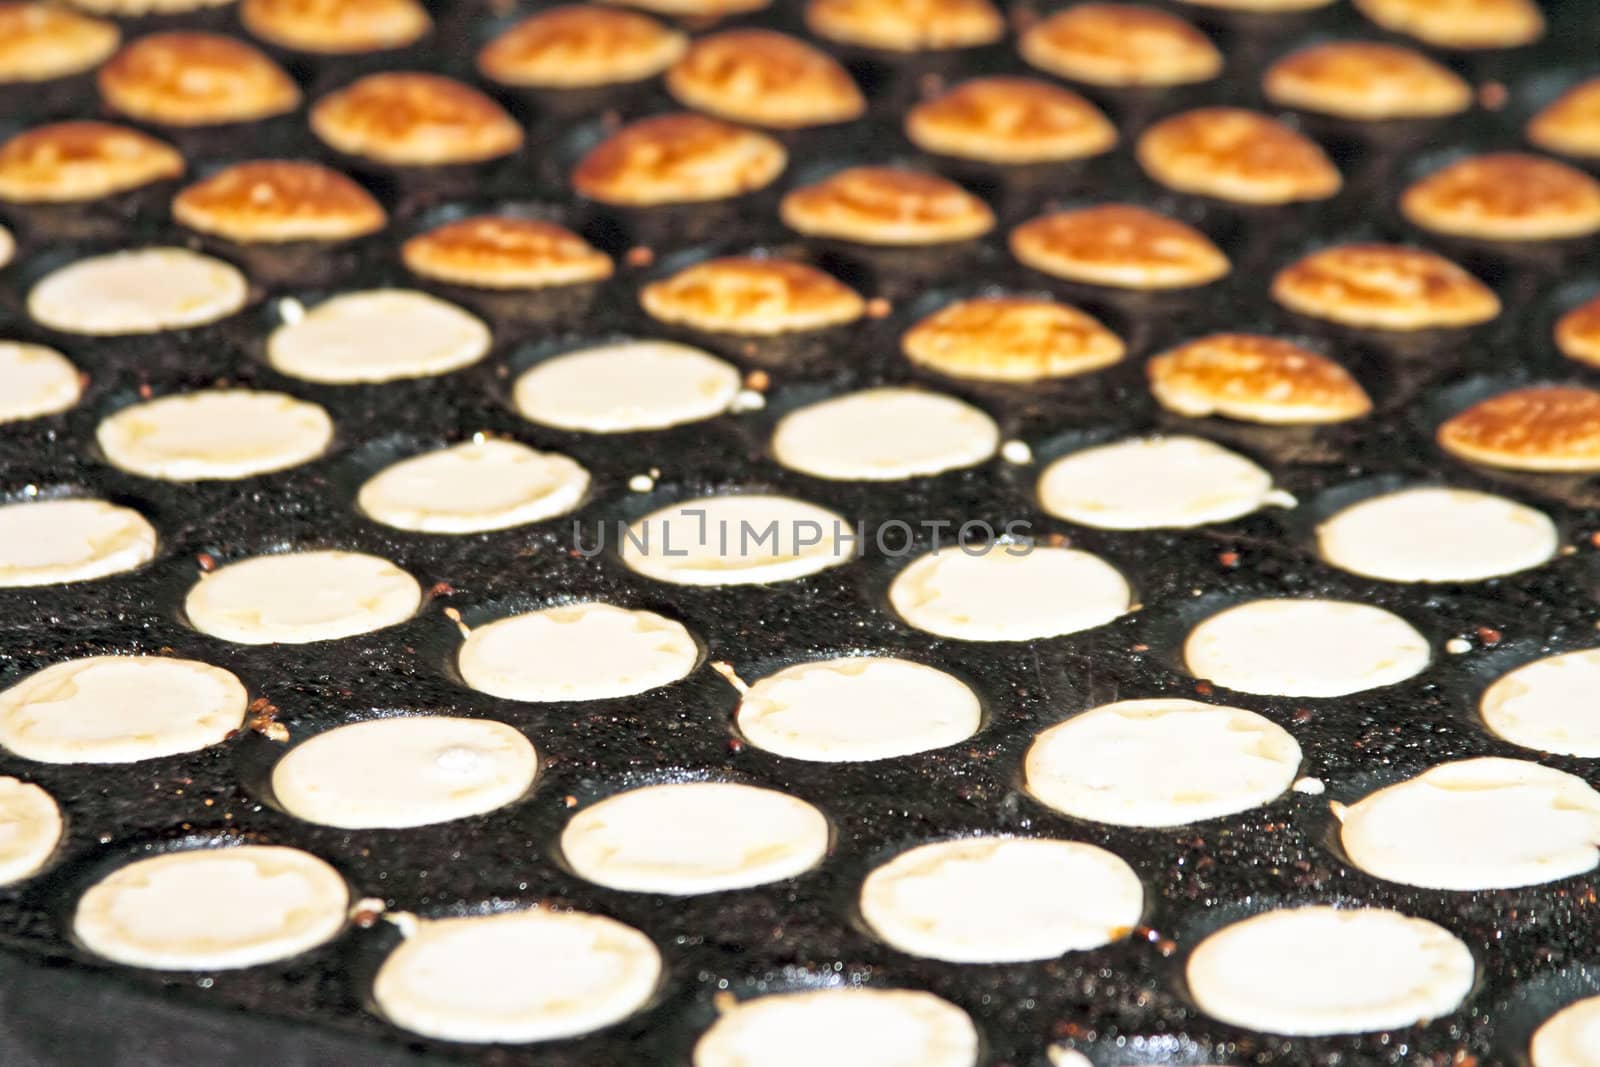 freshly baked traditional Dutch mini pancakes called "poffertjes by devy